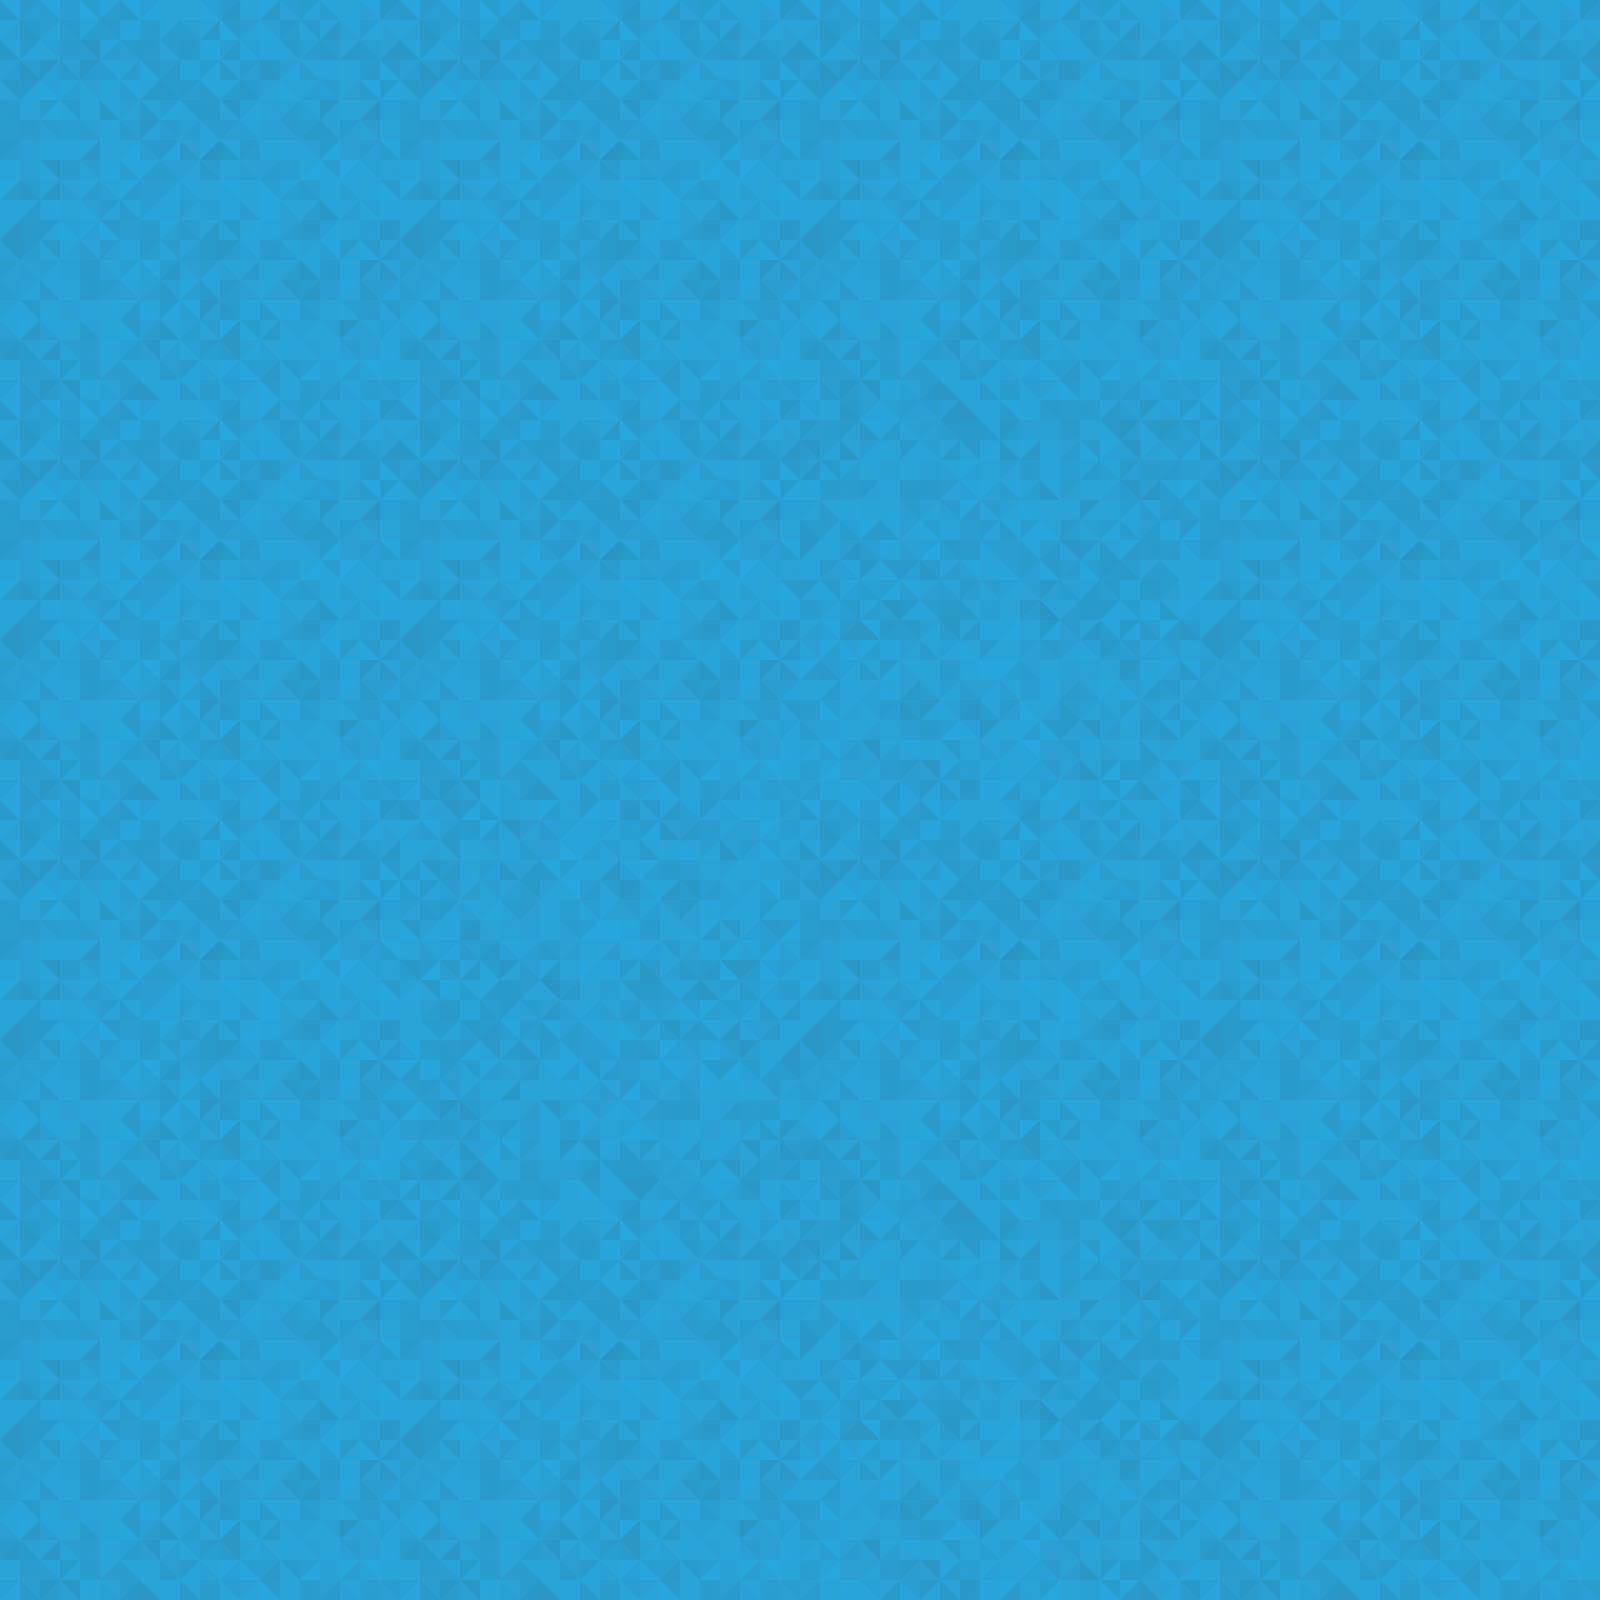 Blue clean small seamless noise background pattern